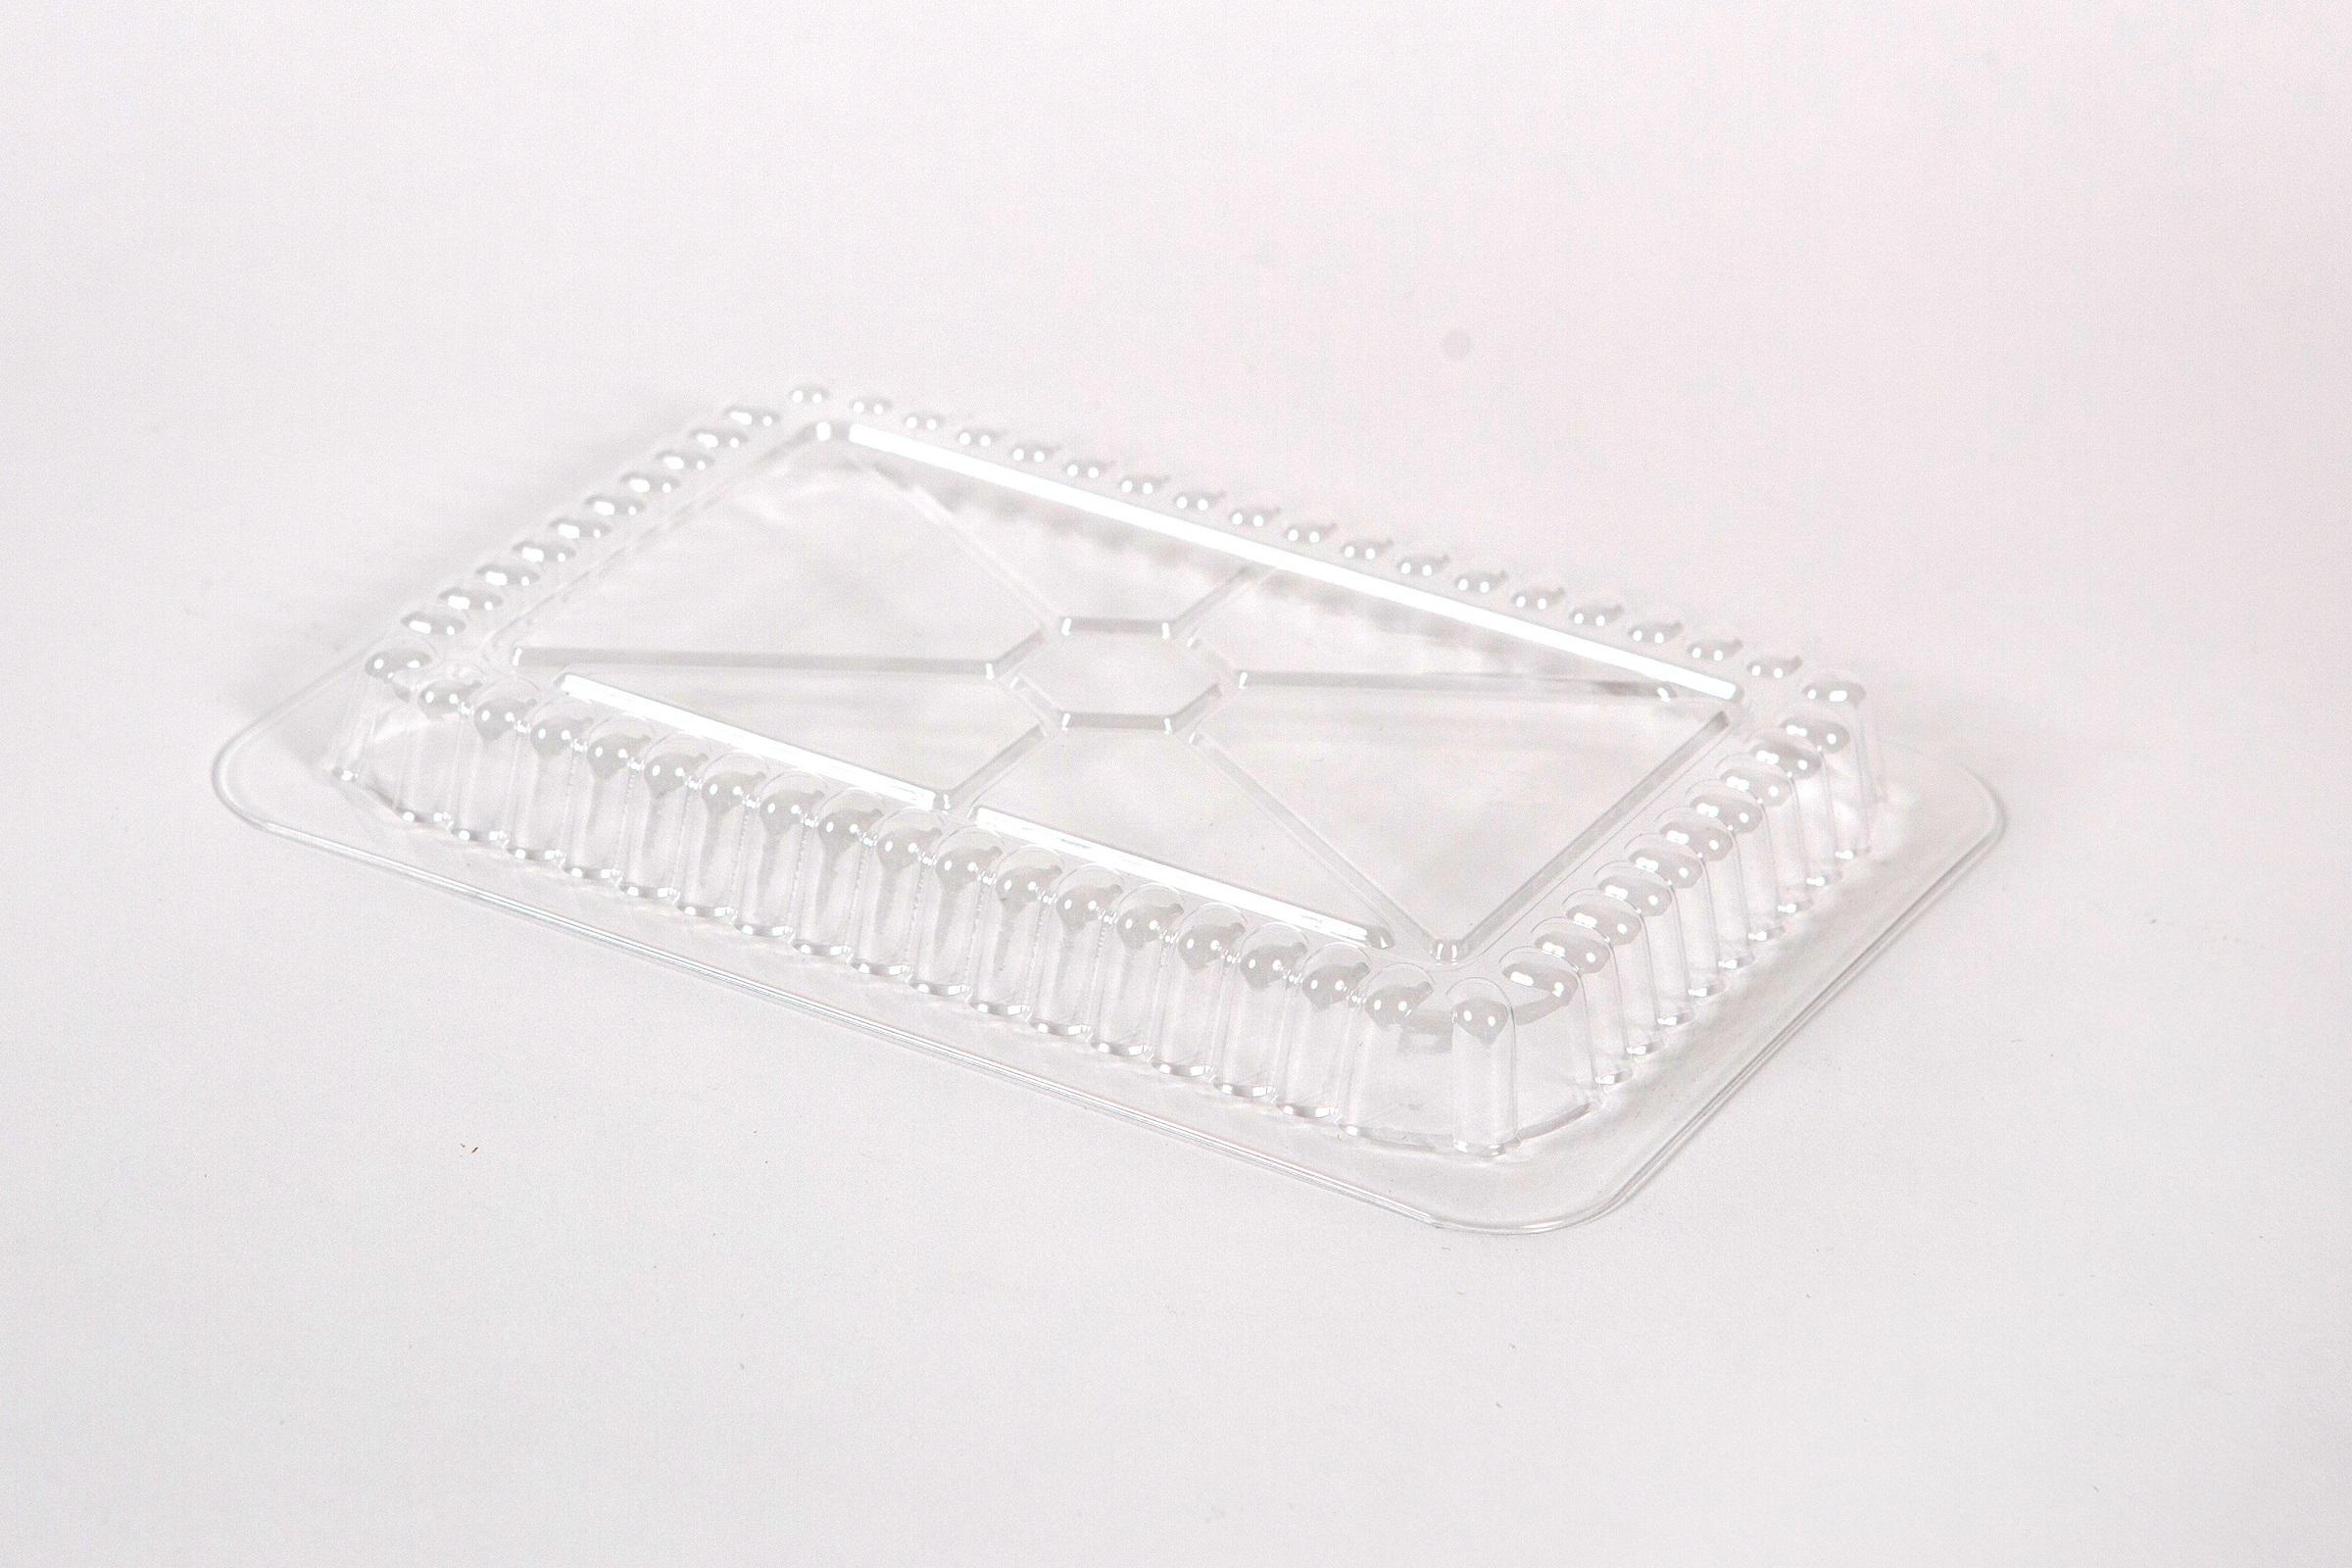 Choice Clear Dome Lid for 2.25 lb. Oblong Shallow Foil Pan - 500